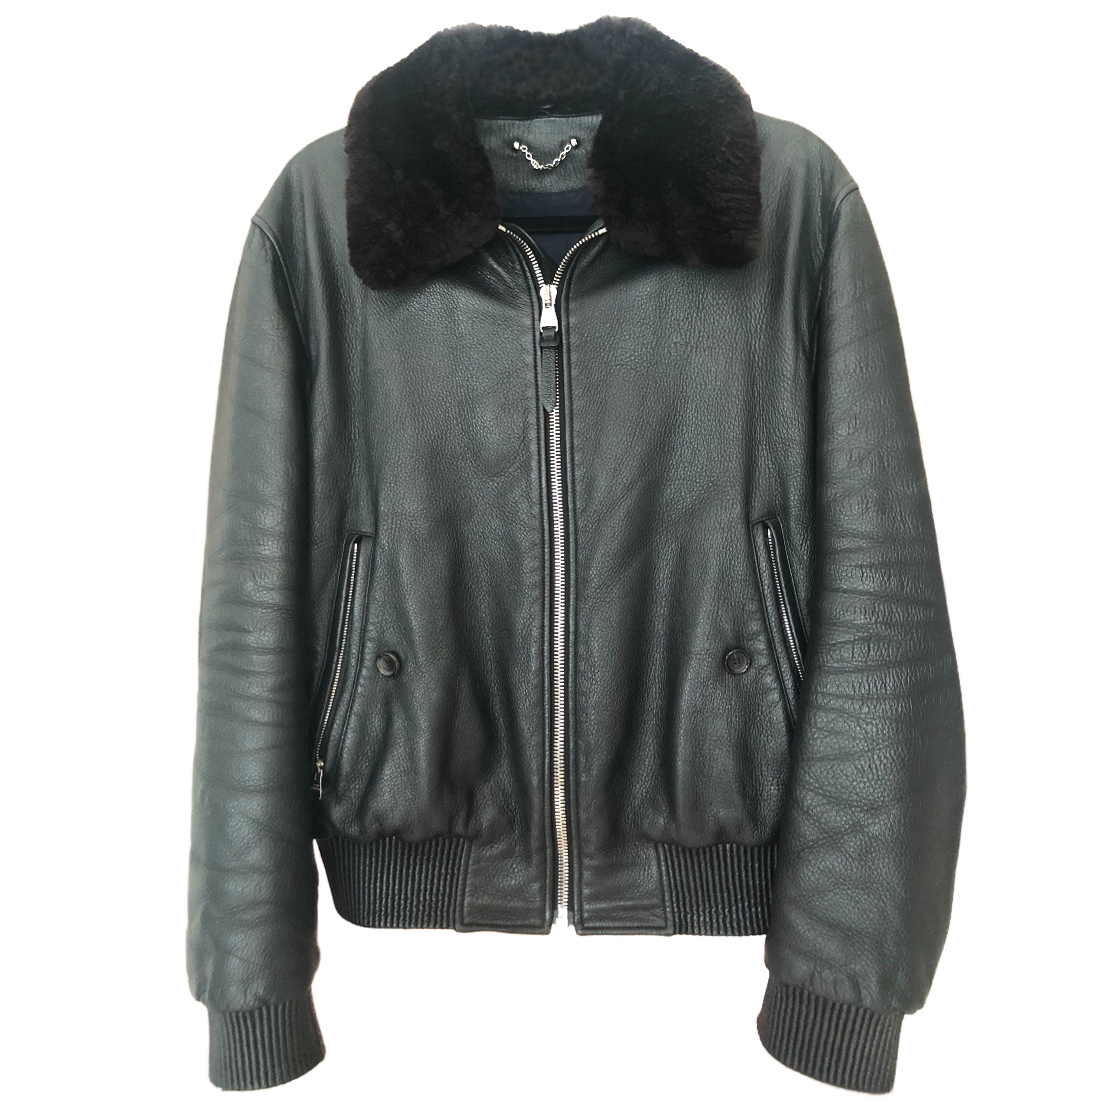 Louis Vuitton Mens Black Leather Jacket With Removable Fur Collar | HEWI